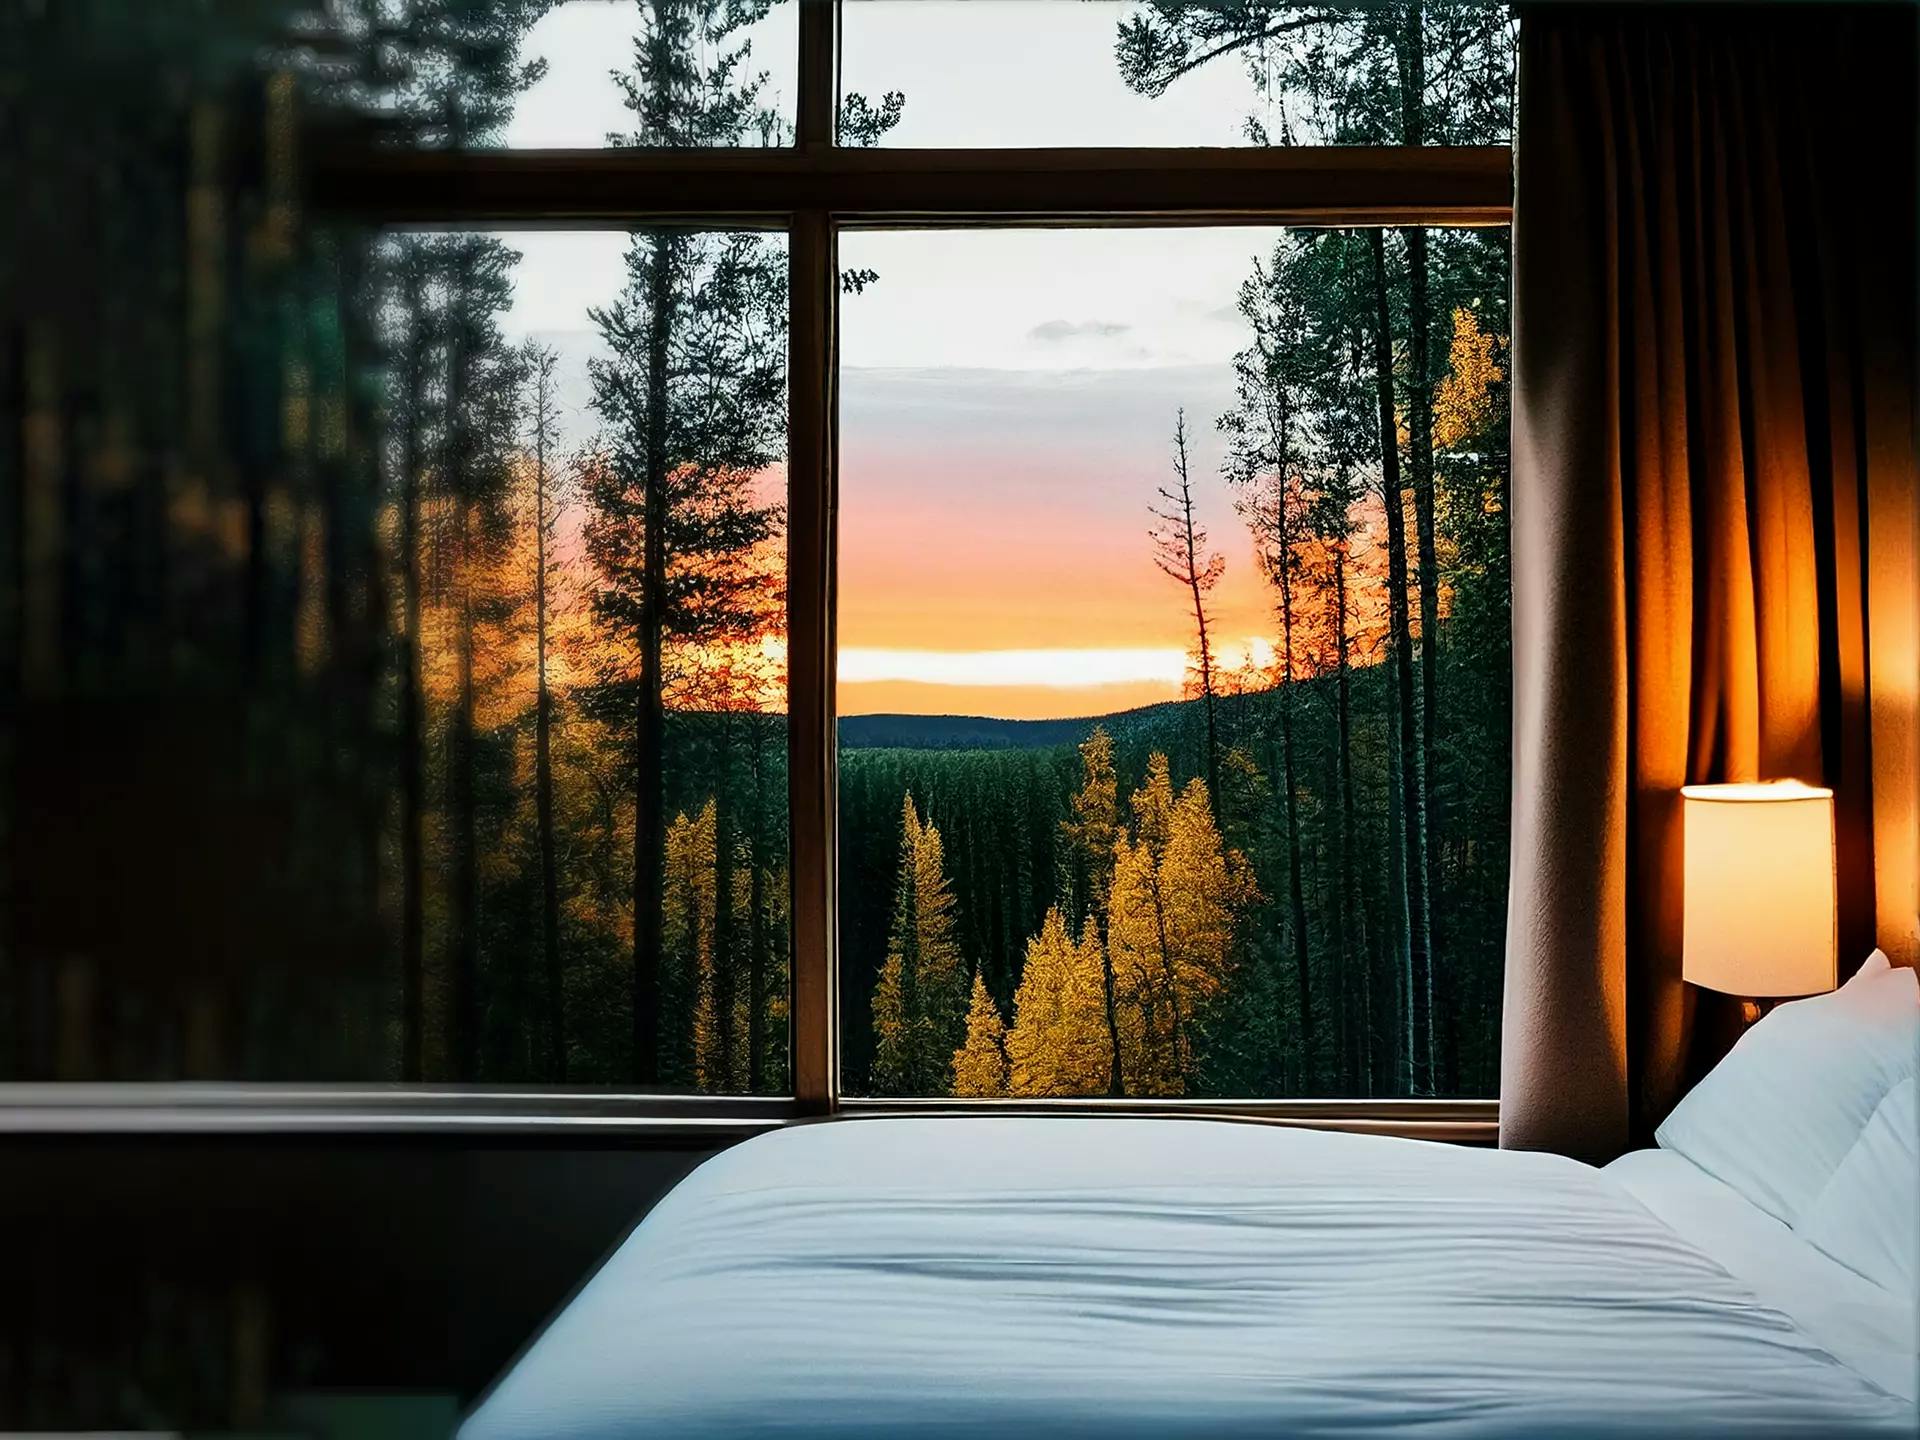 Hotel room with view of nature in the window